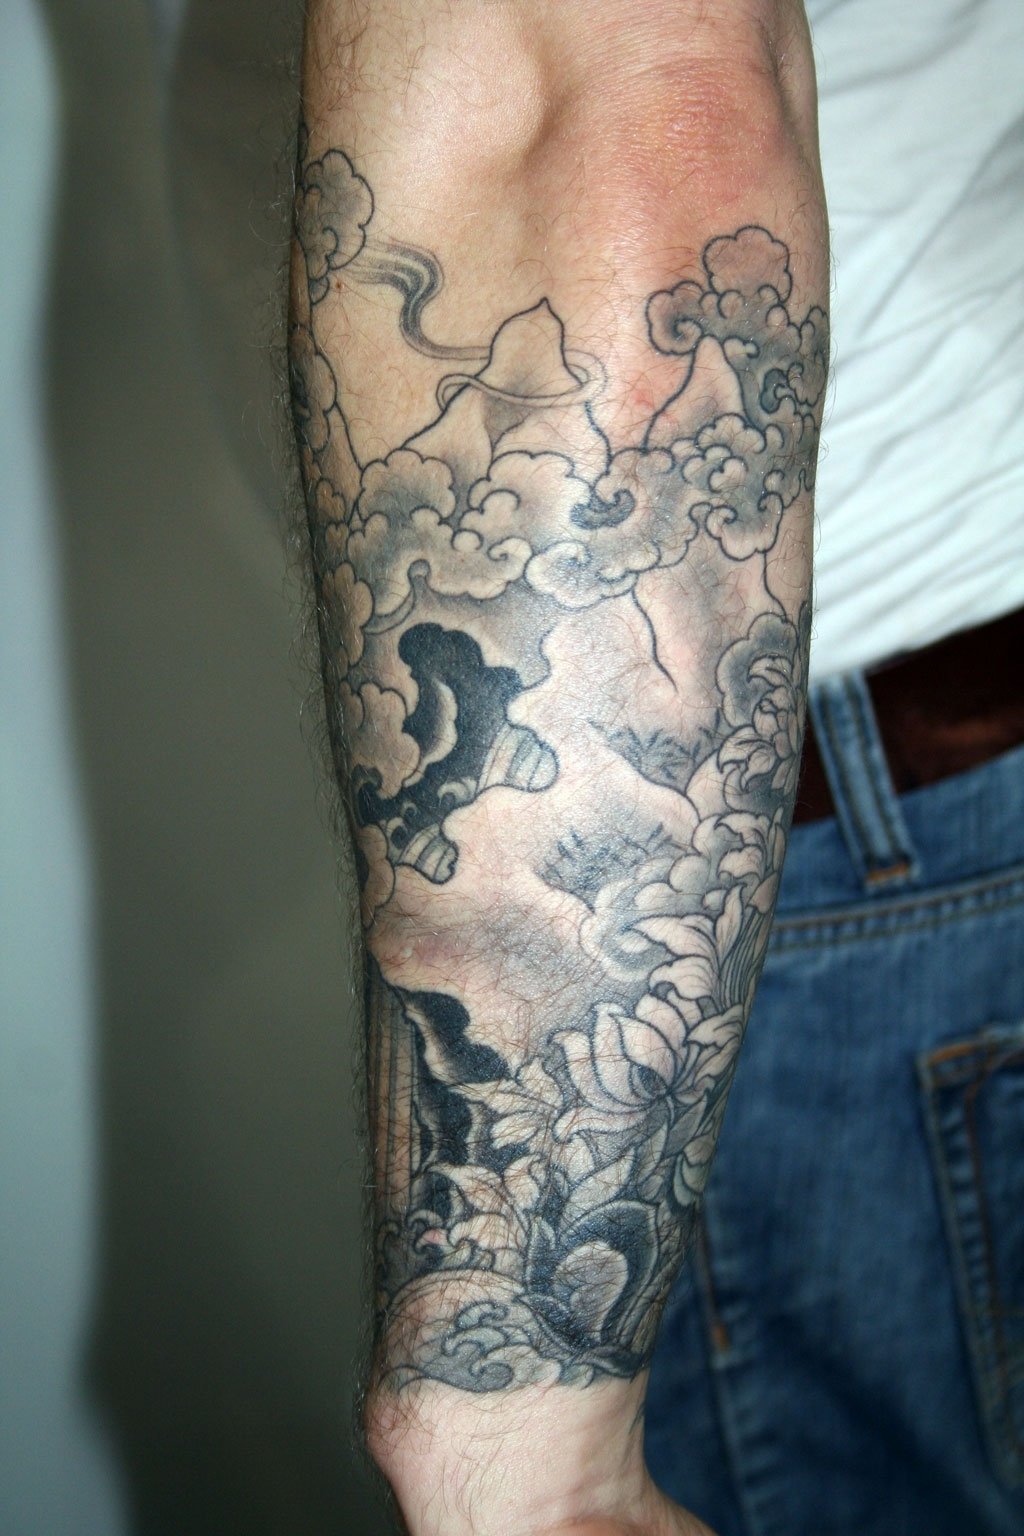 10 Most Recommended Black And Grey Tattoo Ideas half sleeve tattoo designs black and grey cool tattoos bonbaden 1 2022